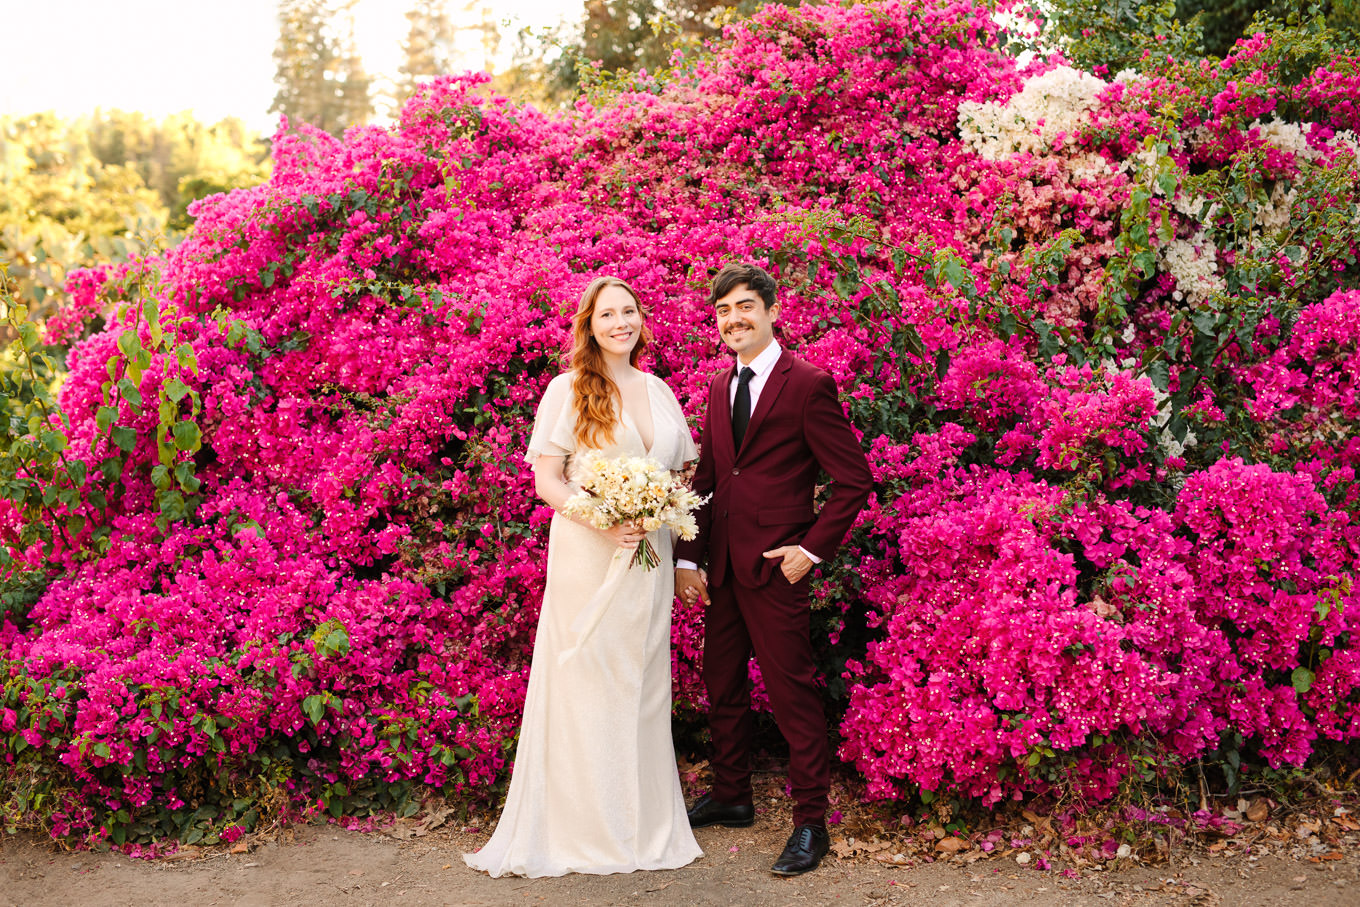 Bride and groom in front of lush bougainvillea | Los Angeles Arboretum Elopement | Colorful and elevated wedding photography for fun-loving couples in Southern California | #LosAngelesElopement #elopement #LAarboretum #LAskyline #elopementphotos   Source: Mary Costa Photography | Los Angeles